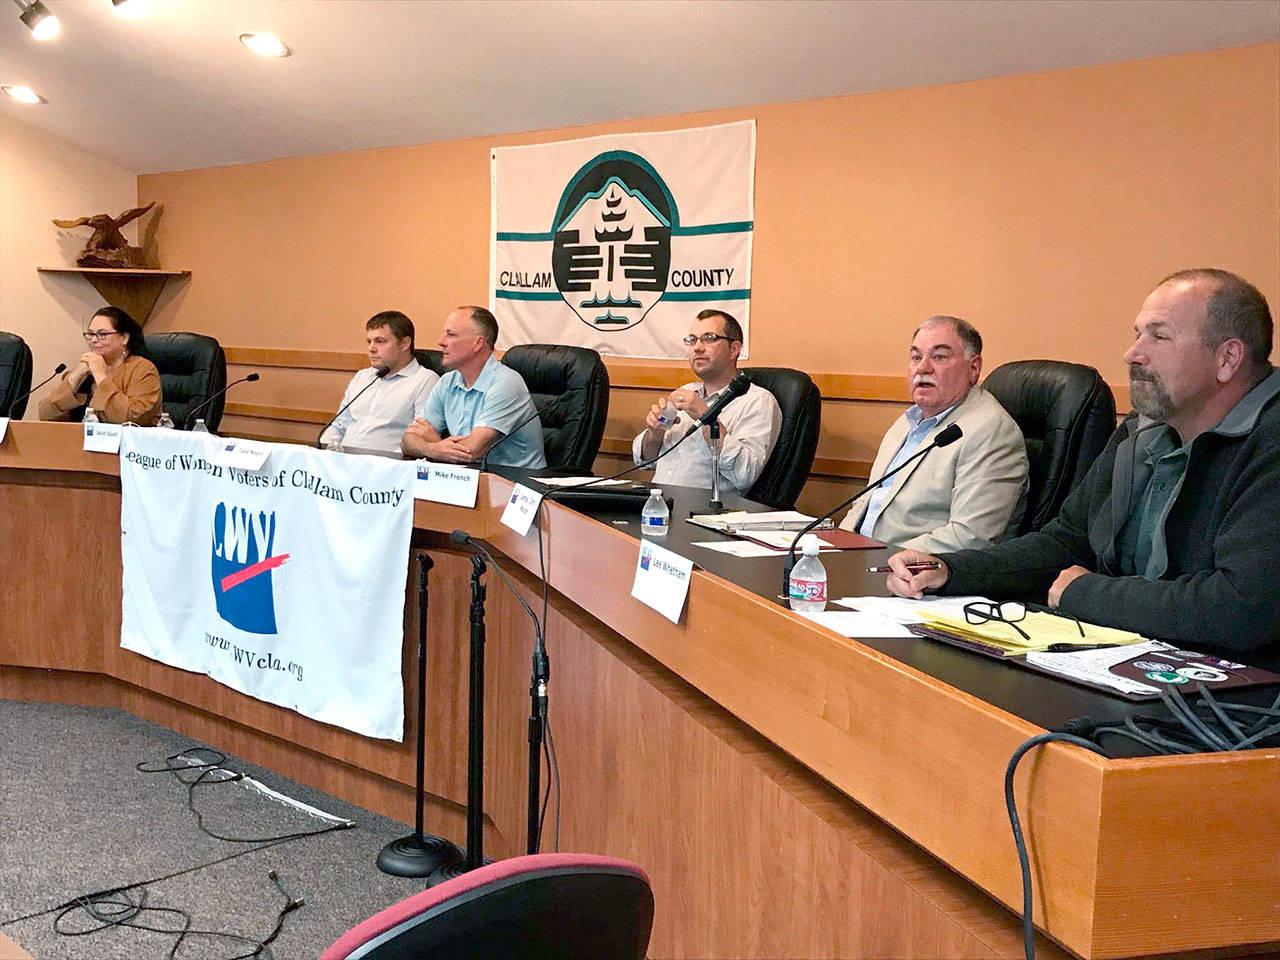 From left, Port Angeles City Council candidates Marolee Smith, Jacob Oppelt, Todd Negus, Mike French, Jim Moran and Lee Whetham answer questions at a voters forum. (Paul Gottlieb/Peninsula Daily News)